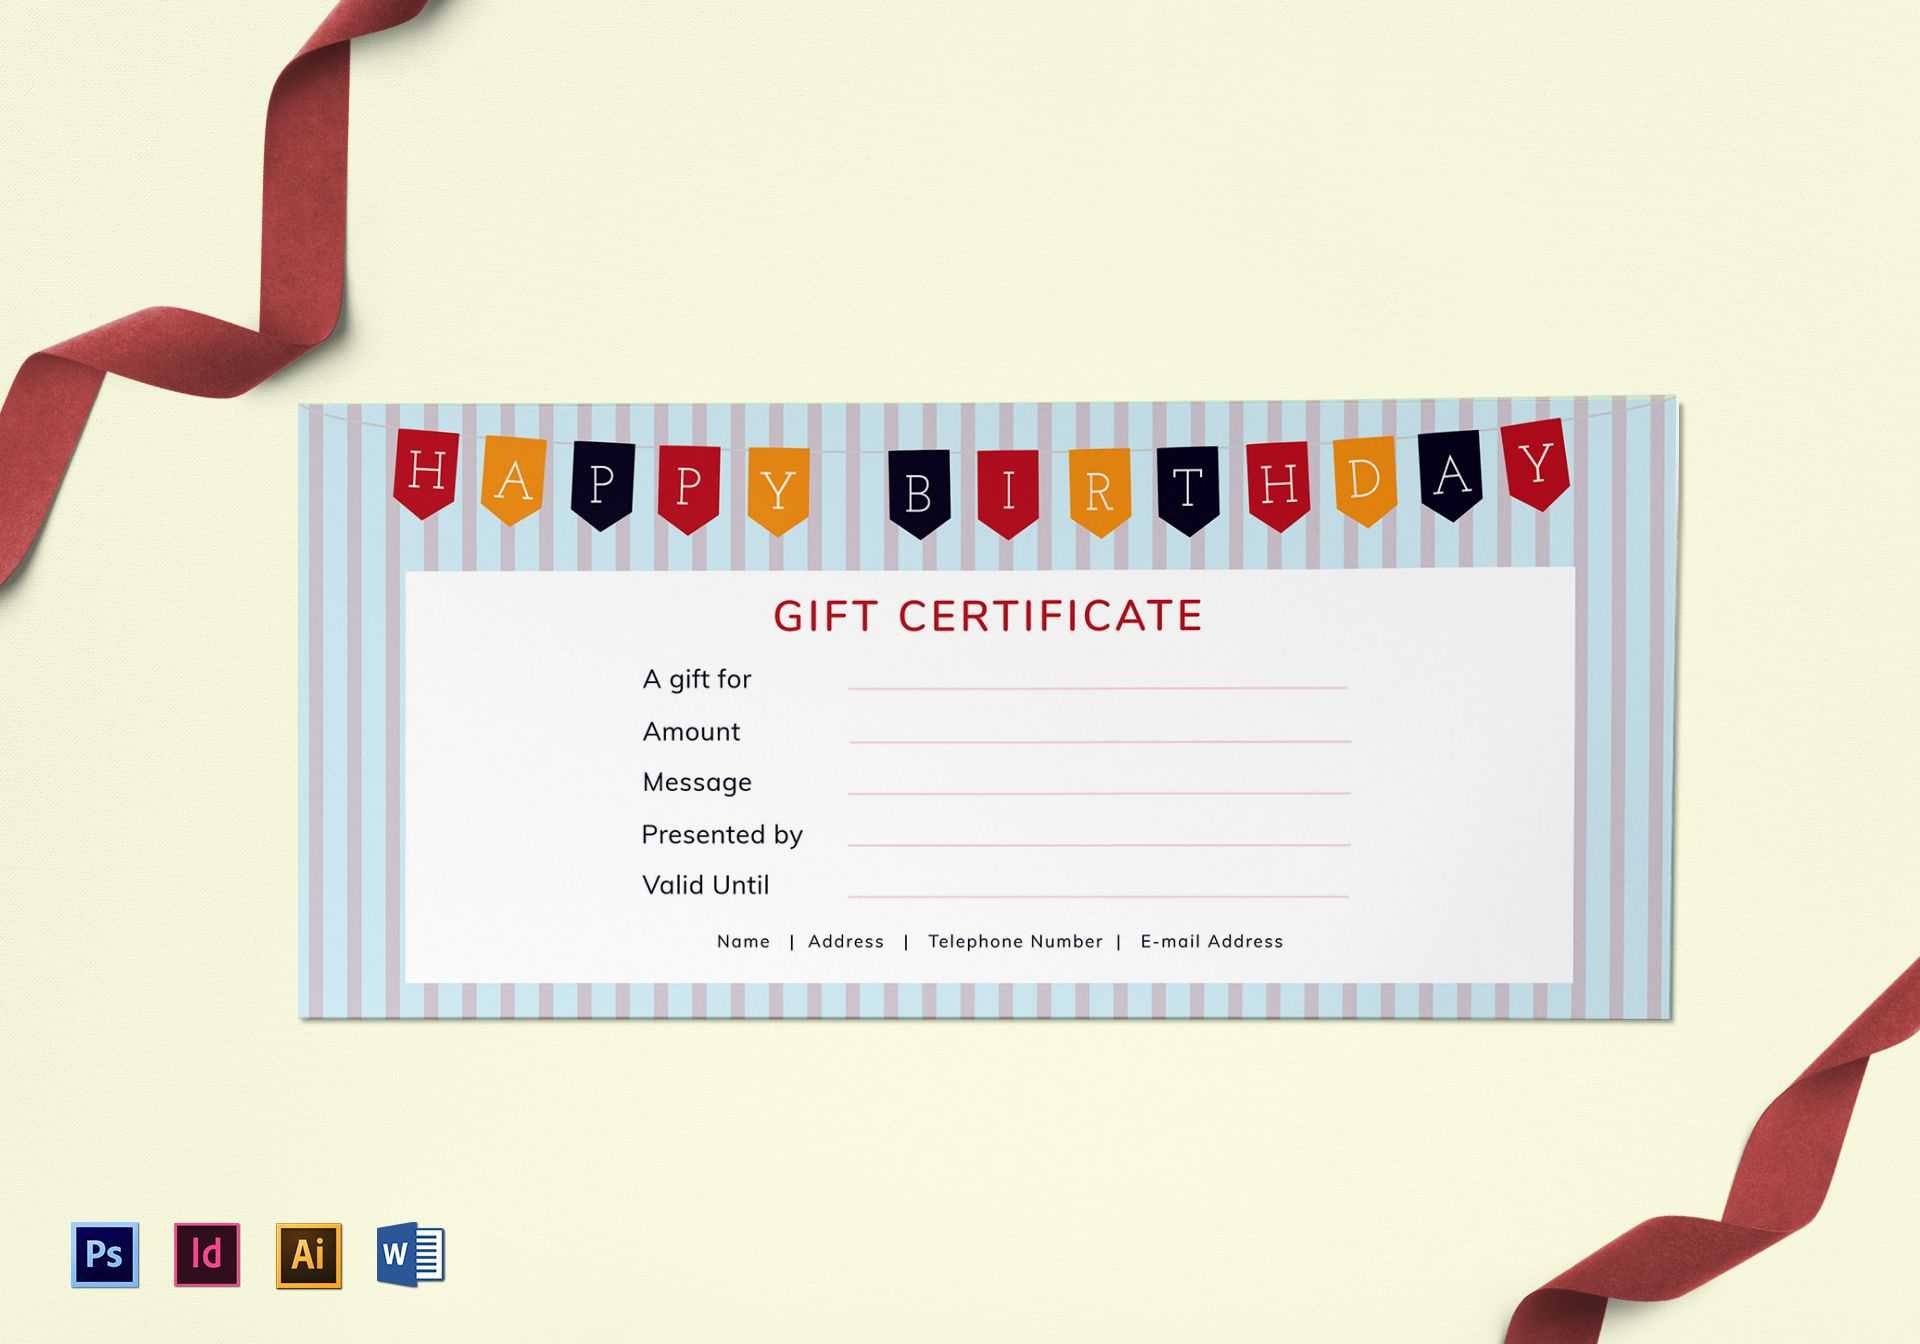 Happy Birthday Gift Certificate Template With Regard To Indesign Gift Certificate Template